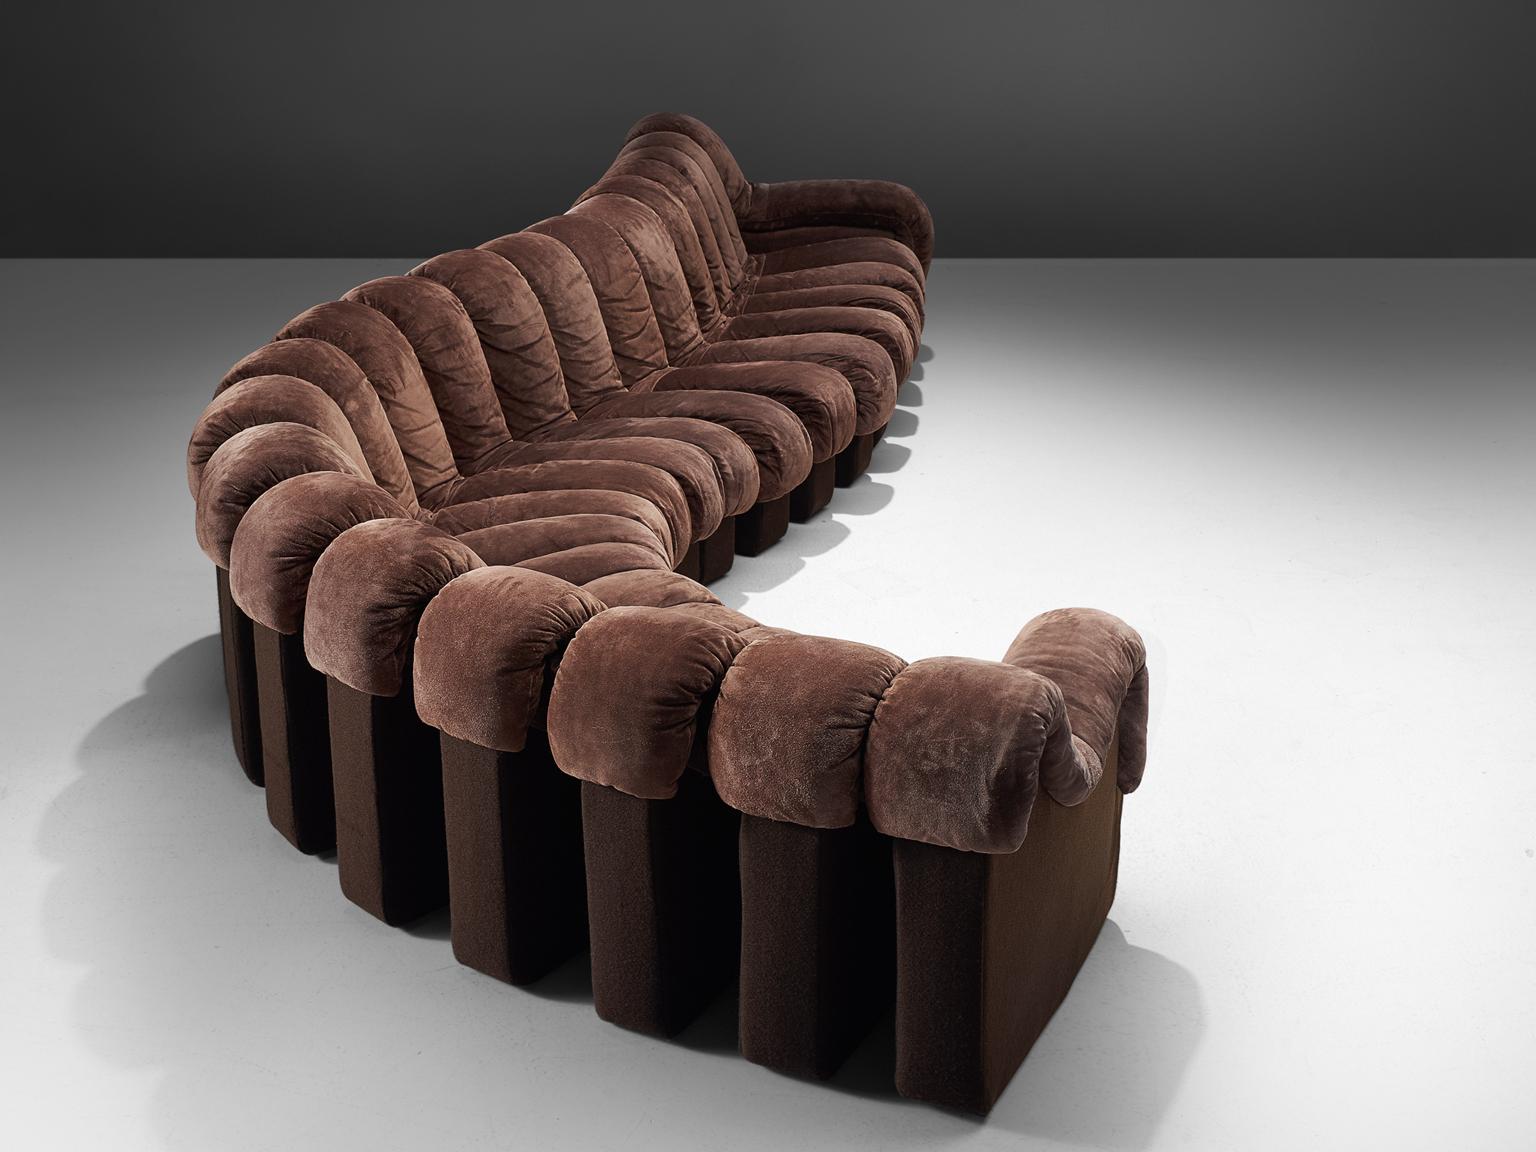 De Sede ‘Snake’ DS-600, in brown suede fabric and felt, Switzerland, 1972. 

De Sede 'Non Stop' sectional sofa containing twenty pieces in original grey brown colored fabric, of which 18 centrepieces and two higher armrests. Any number of pieces